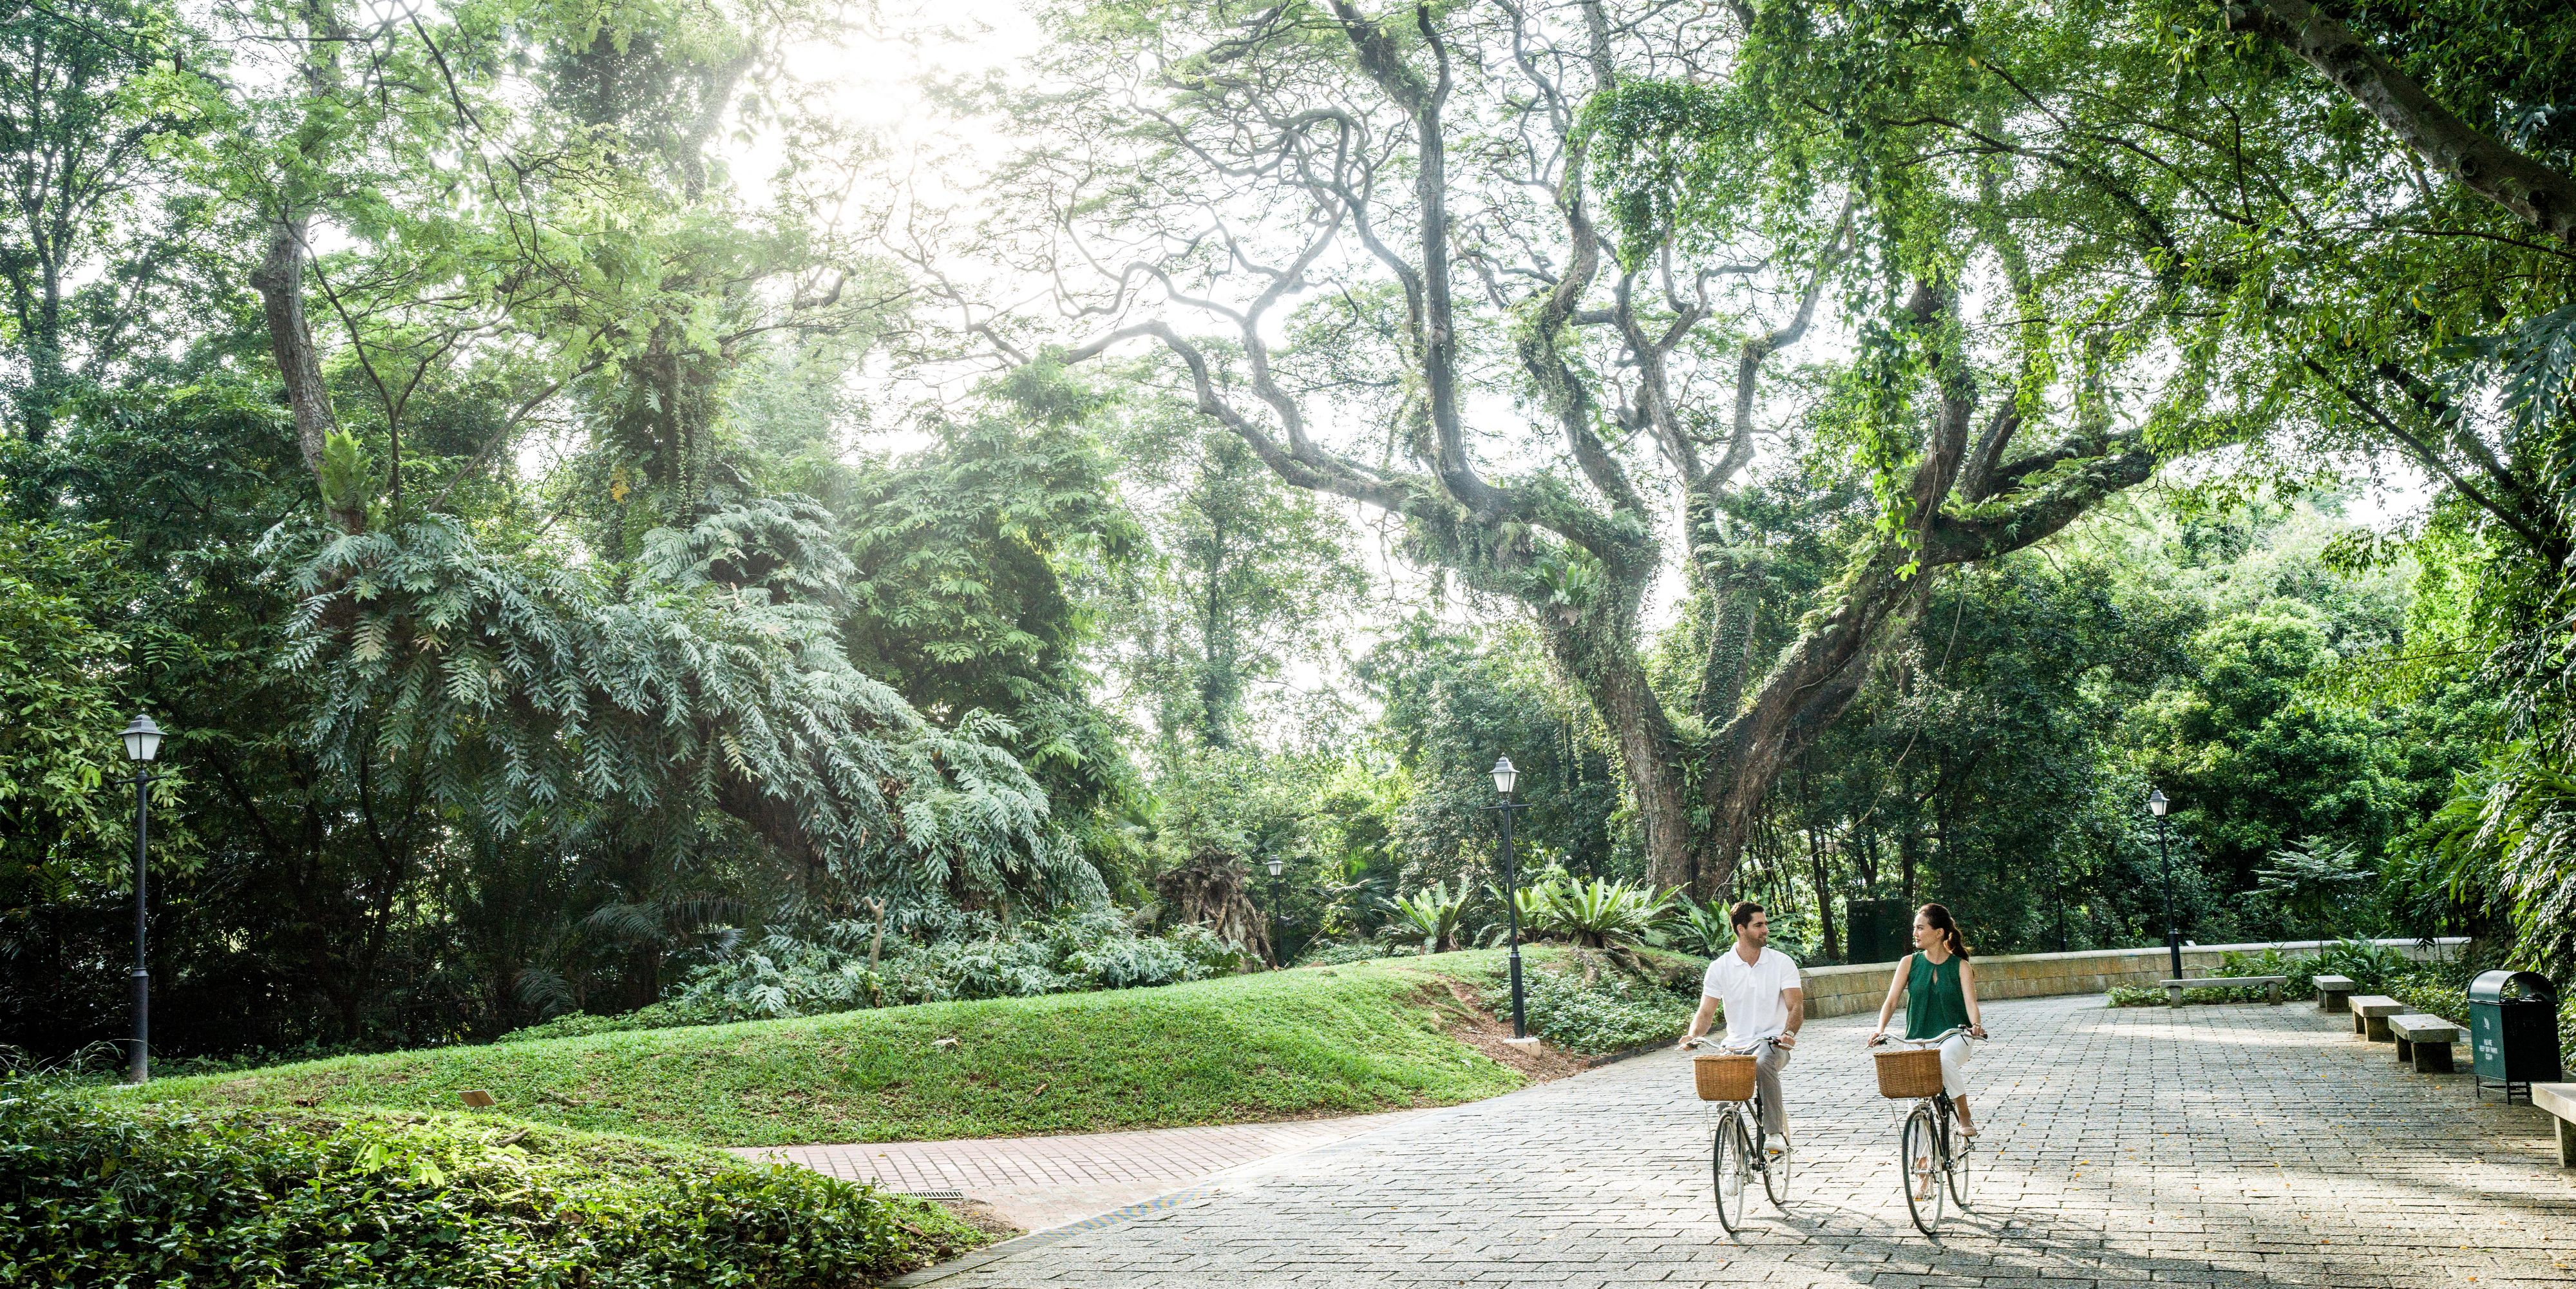 Designed in Tokyo and built for city living, Tokyo bikes are perfect for urban exploration and offered complimentary to hotel guests for exploration of the vibrant Robertson Quay precinct. Please approach our Concierge at level 1 for details.